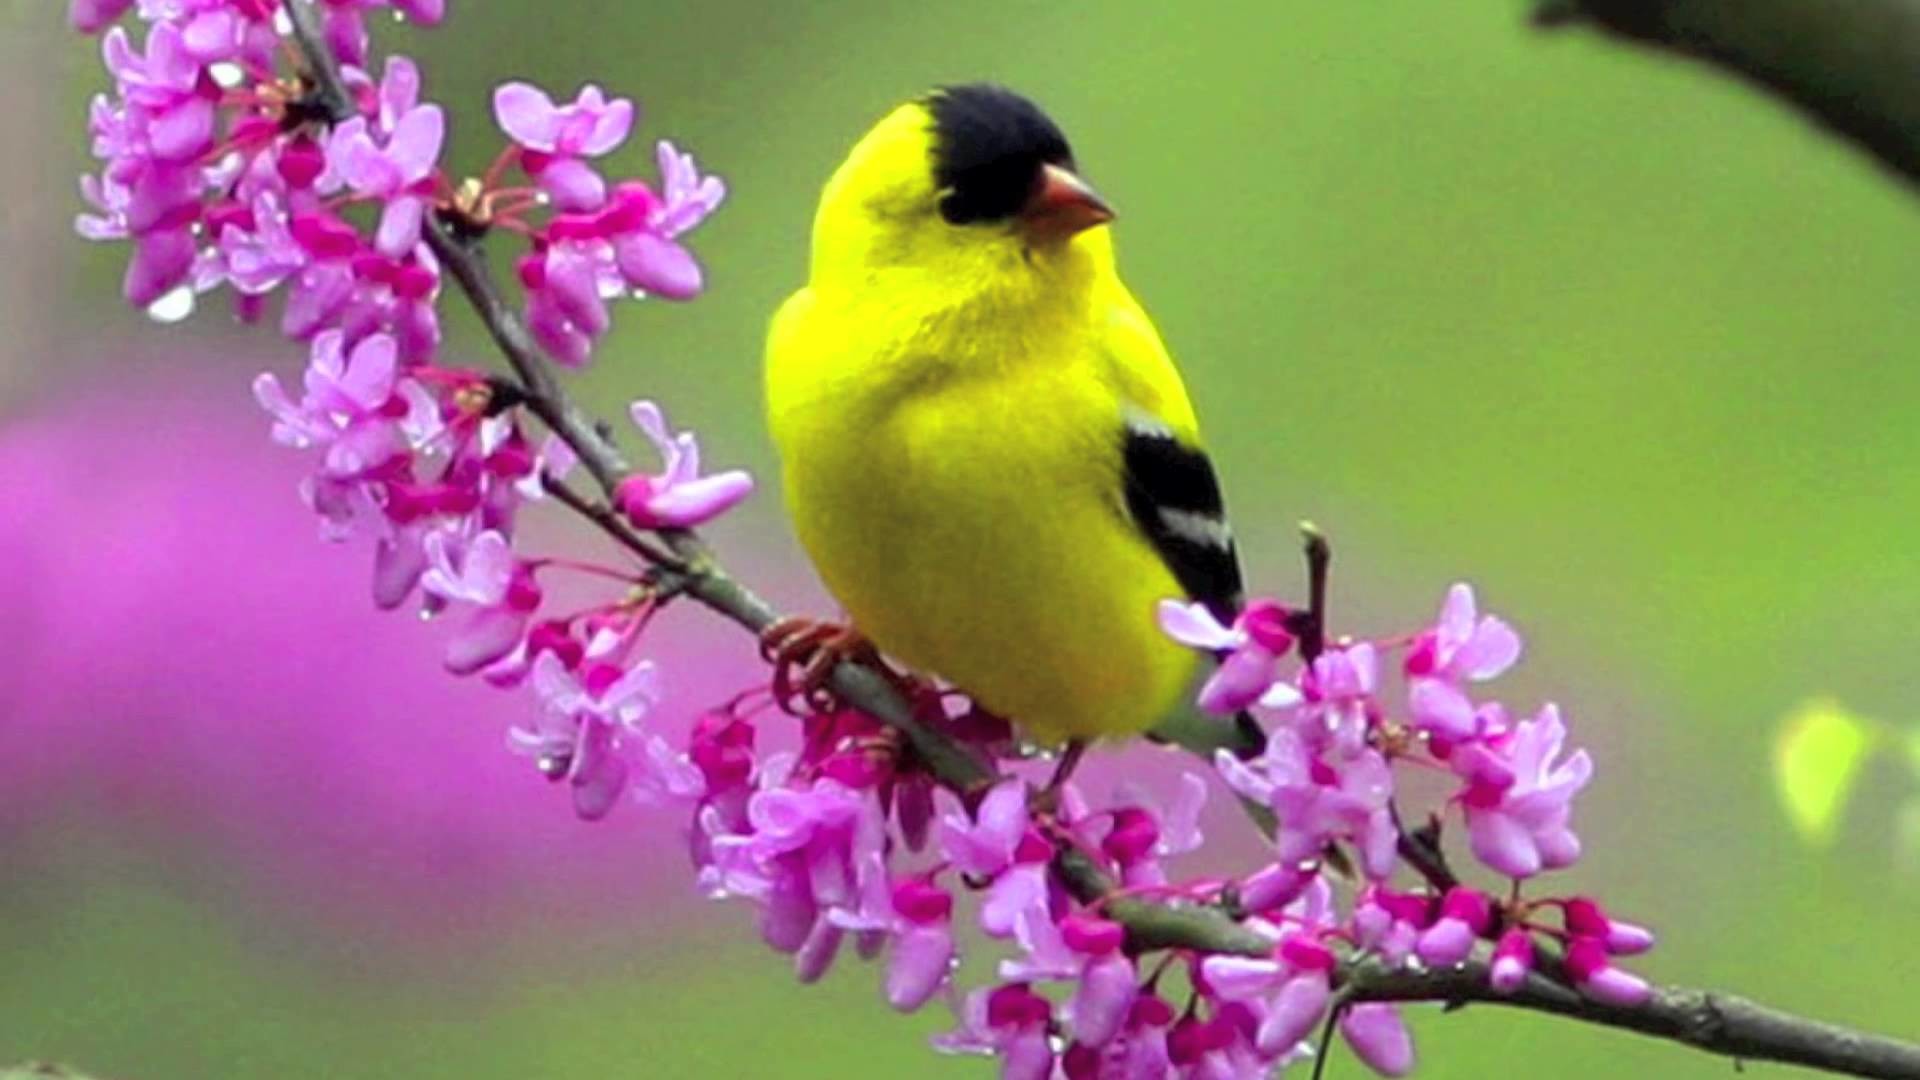 Wallpaper Birds and Flowers (61+ images)